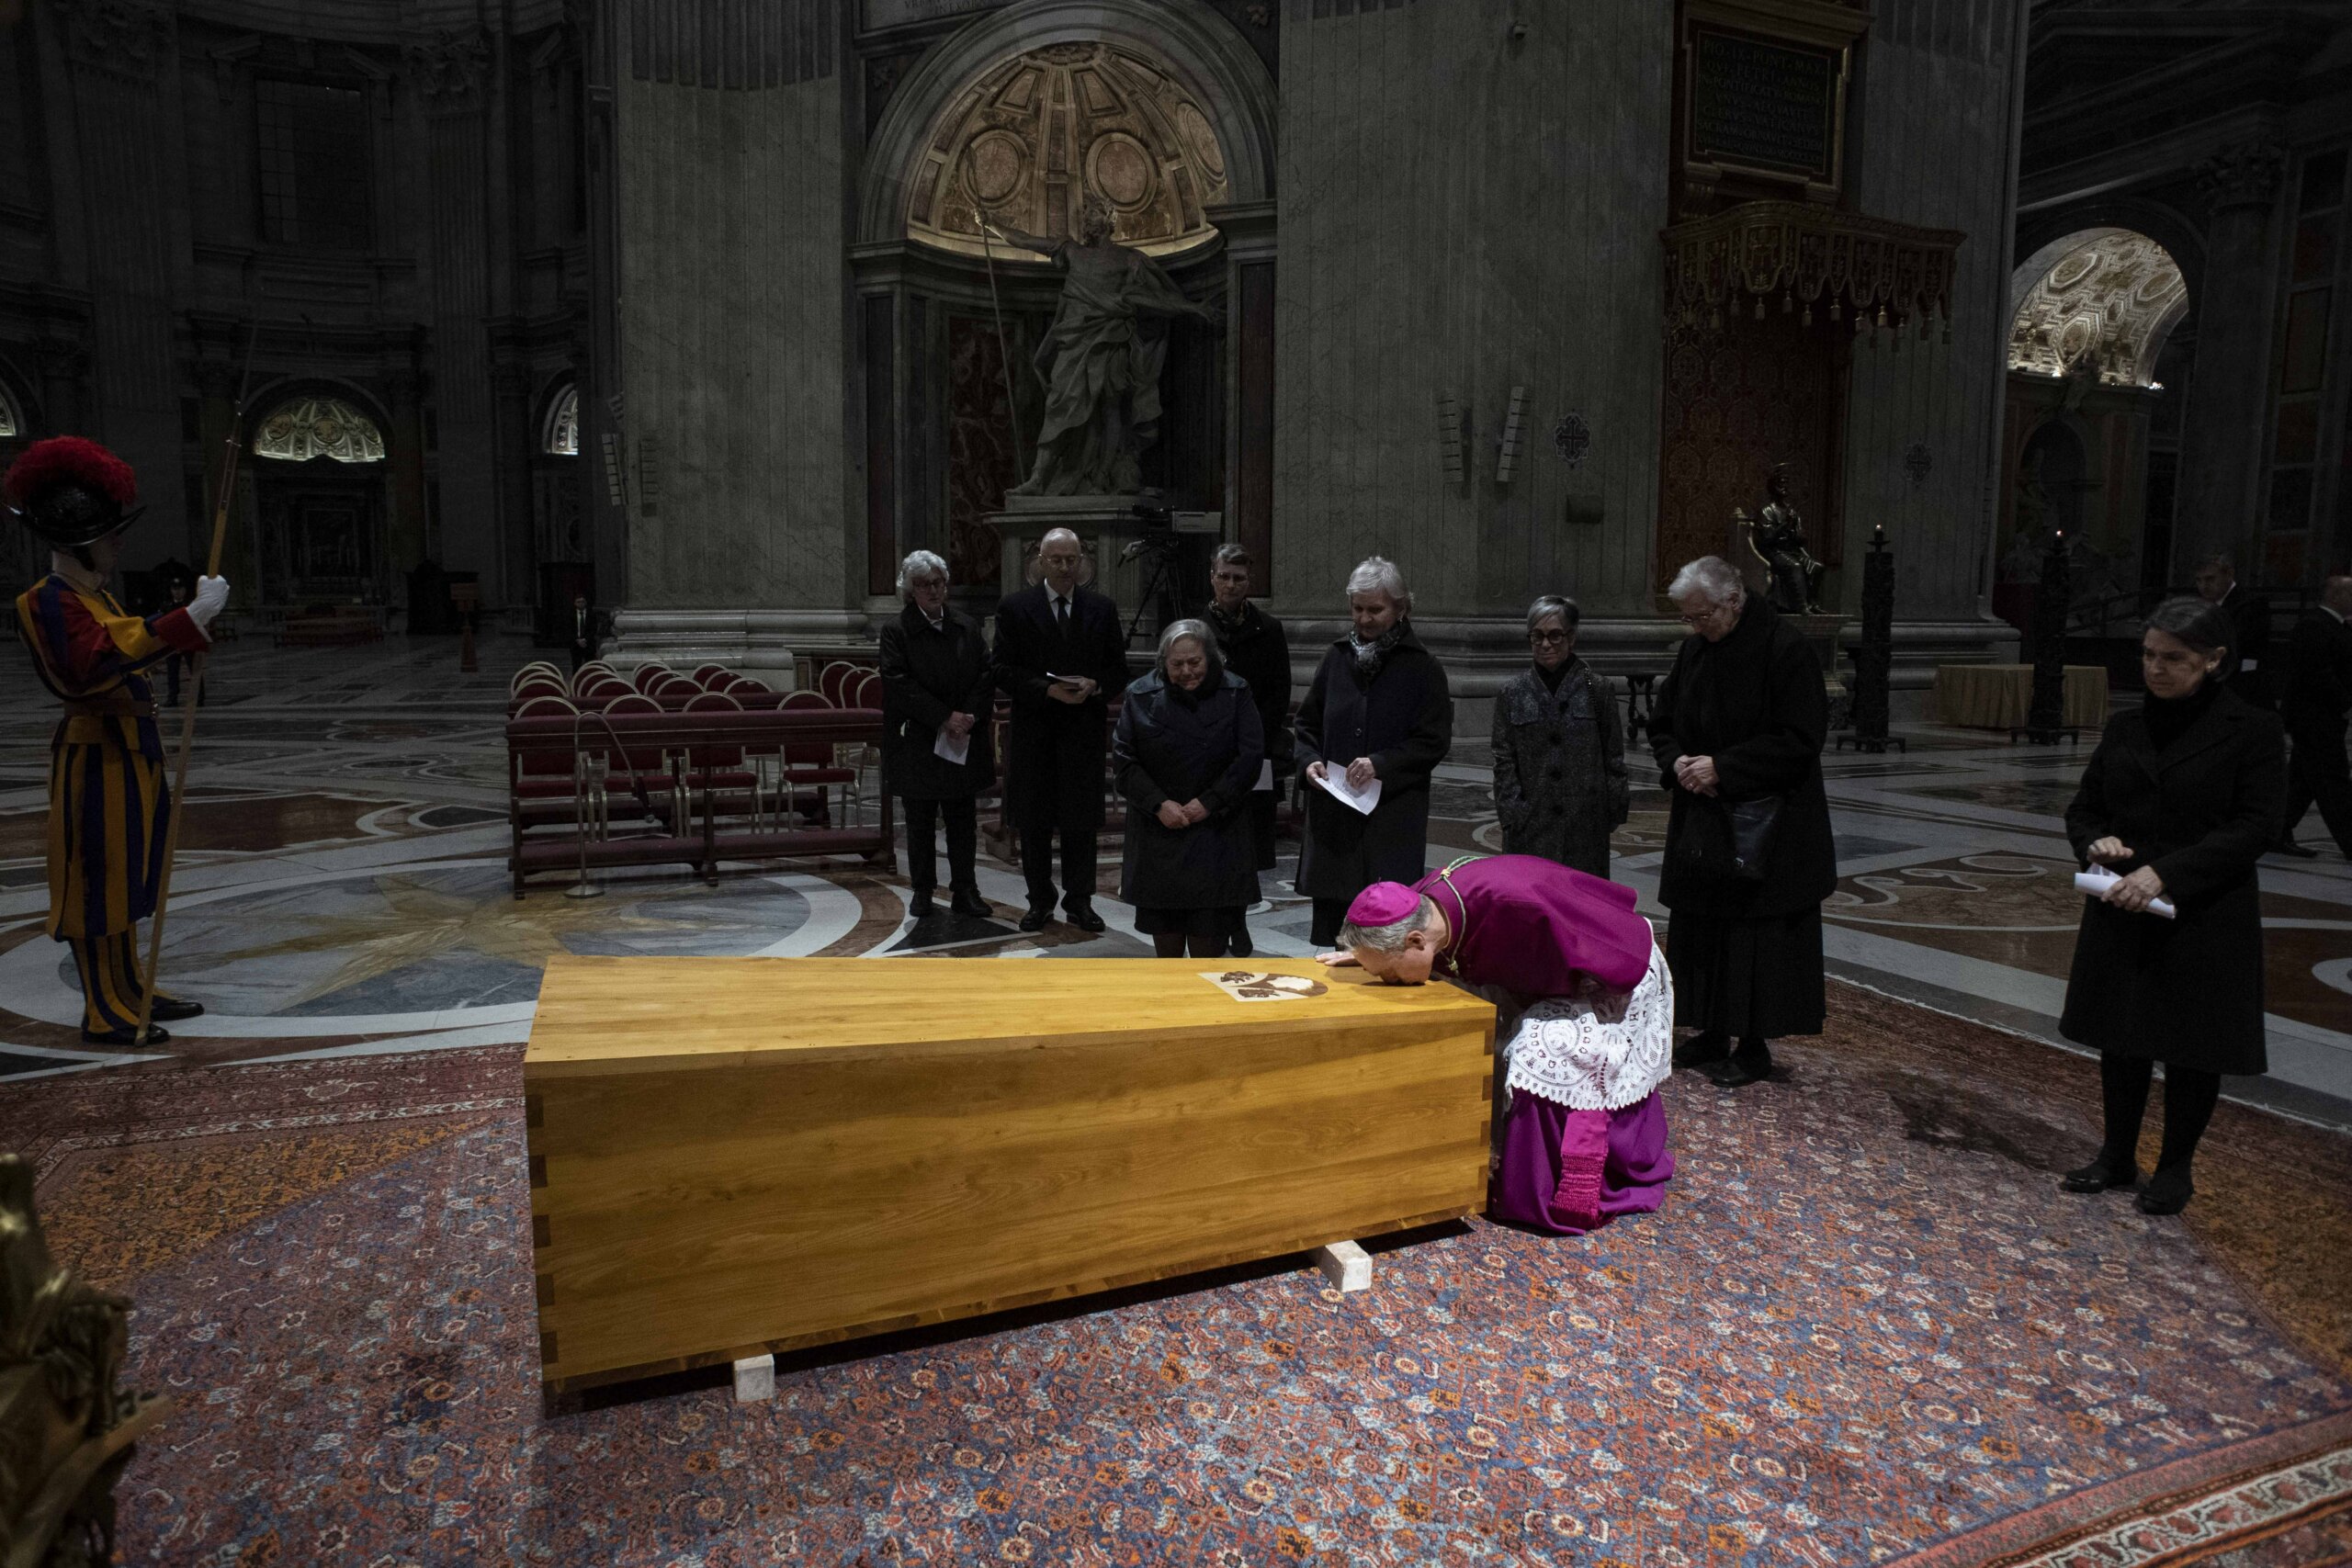 Pope Benedict Xvi Laid To Rest Where 2 Canonized Popes Were Buried Roman Catholic Diocese Of